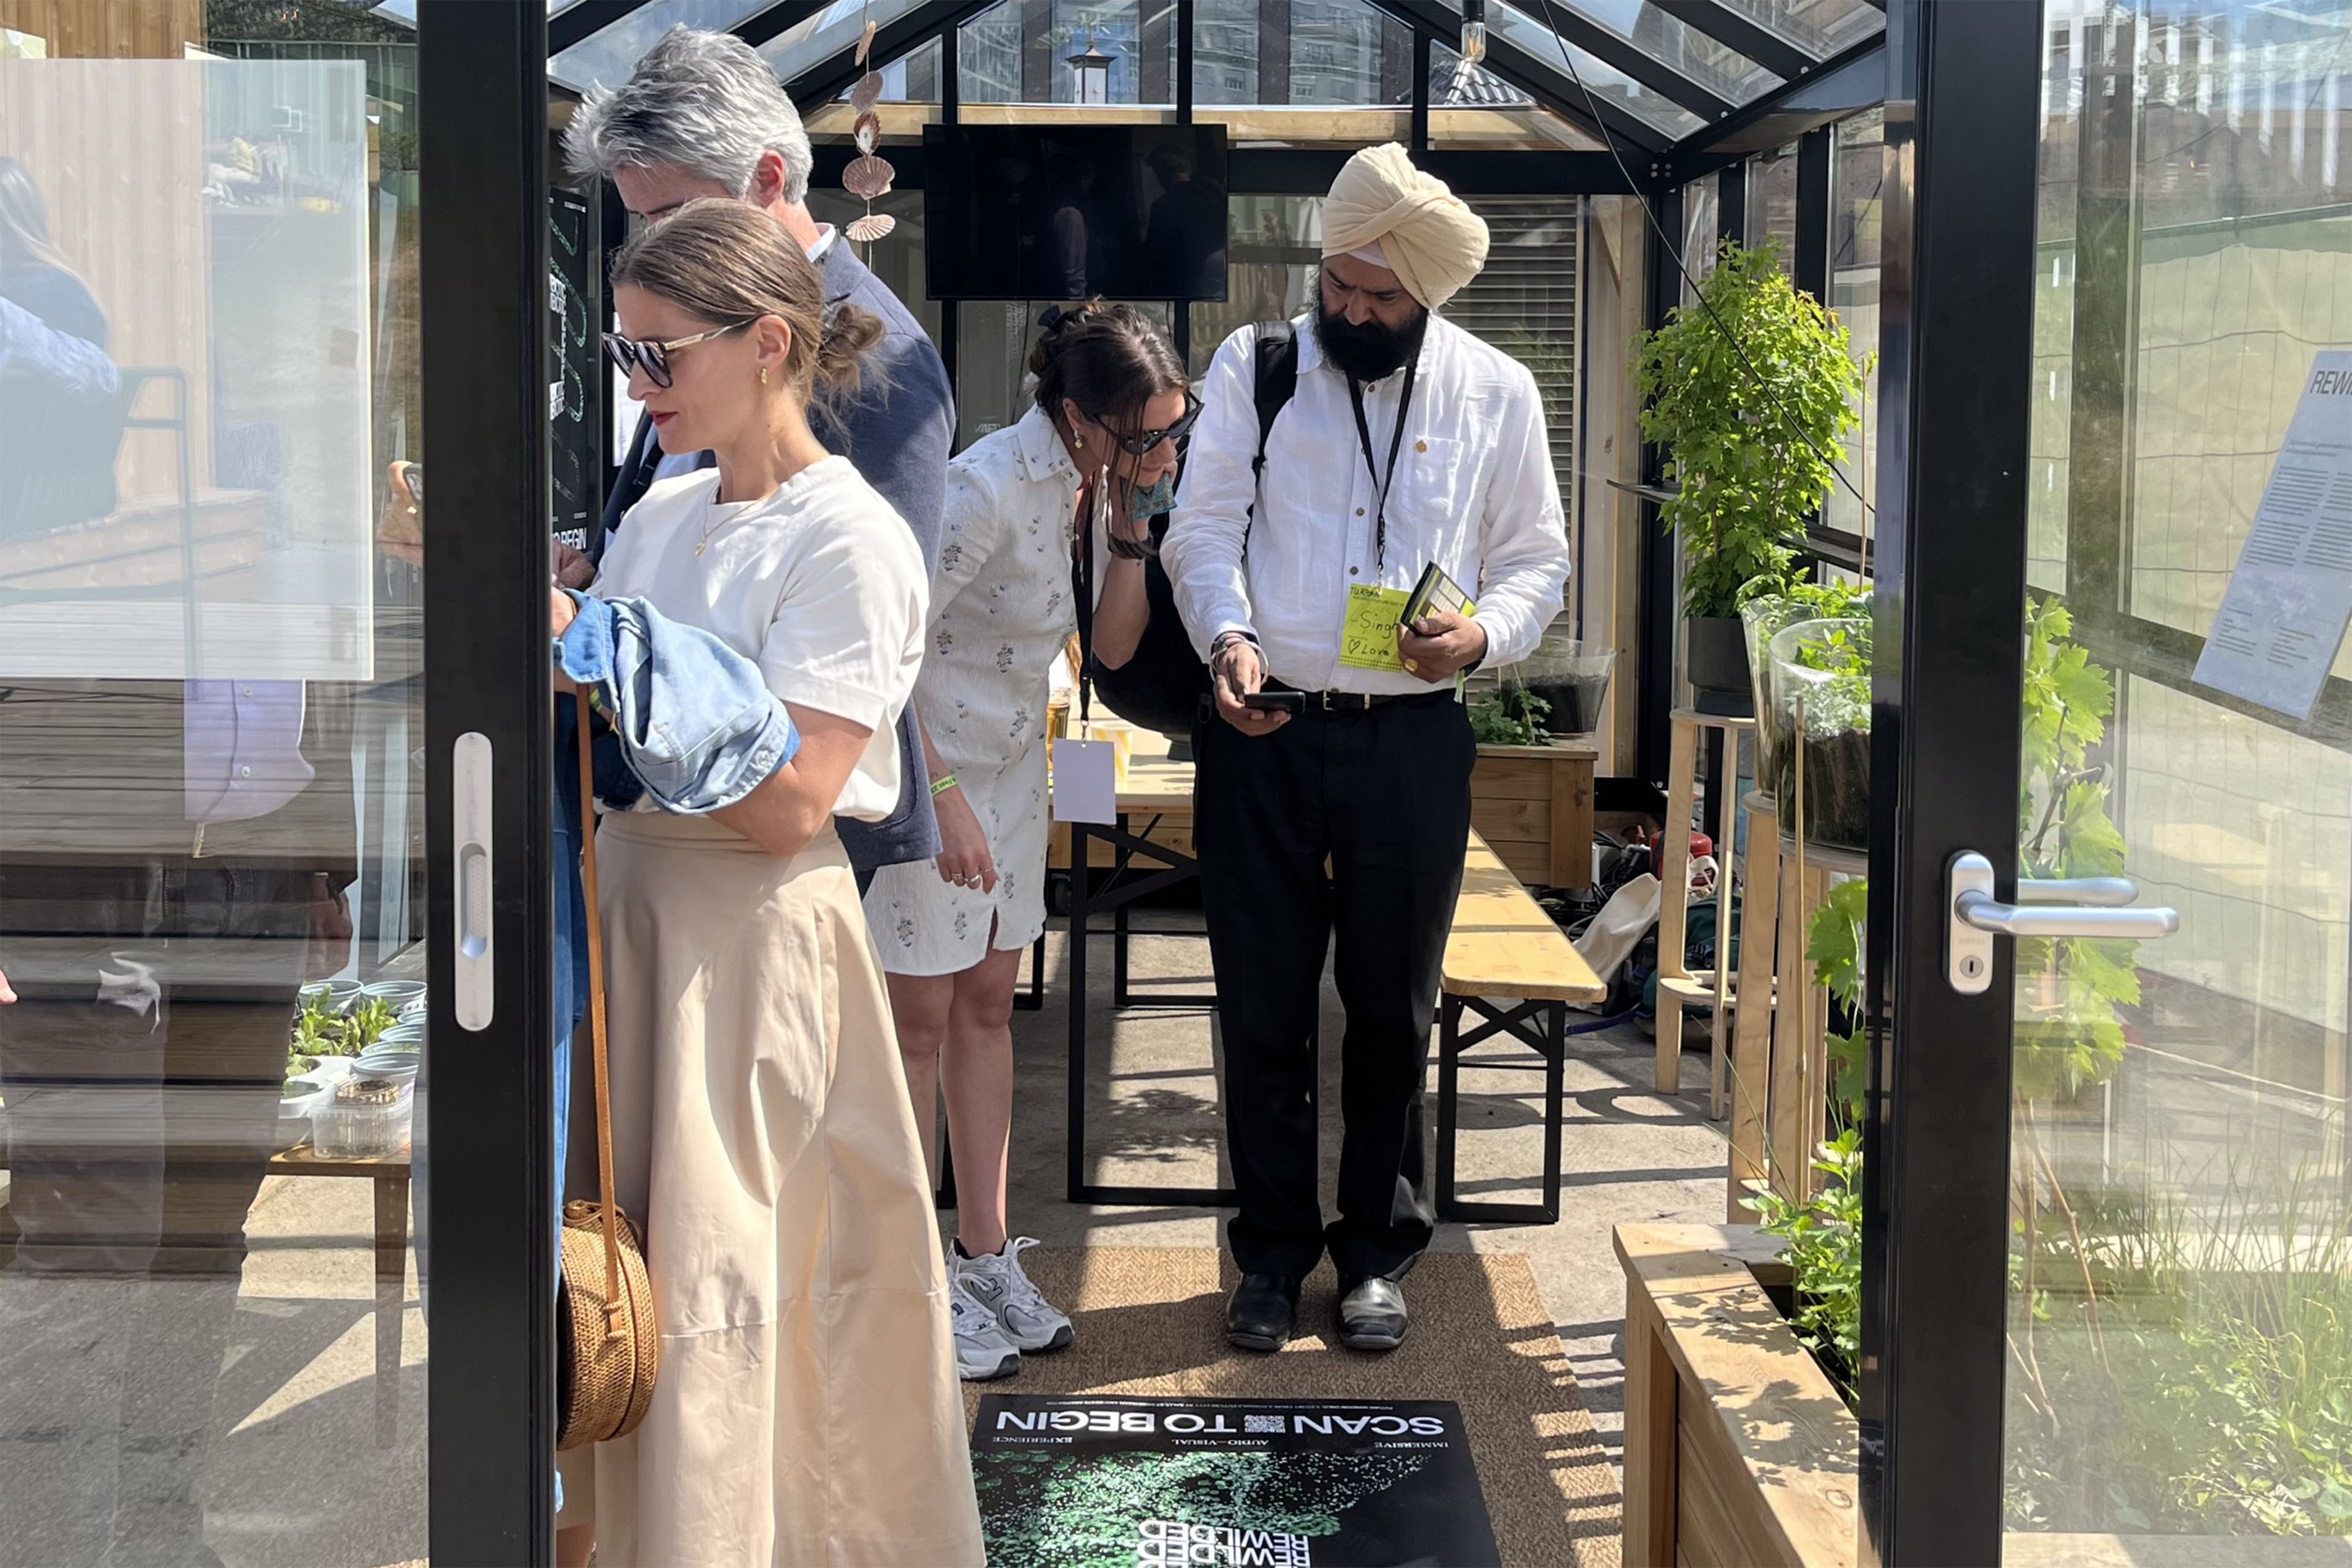 Sustainability leaders discuss Window to the Future at the greenhouse with EY teams.